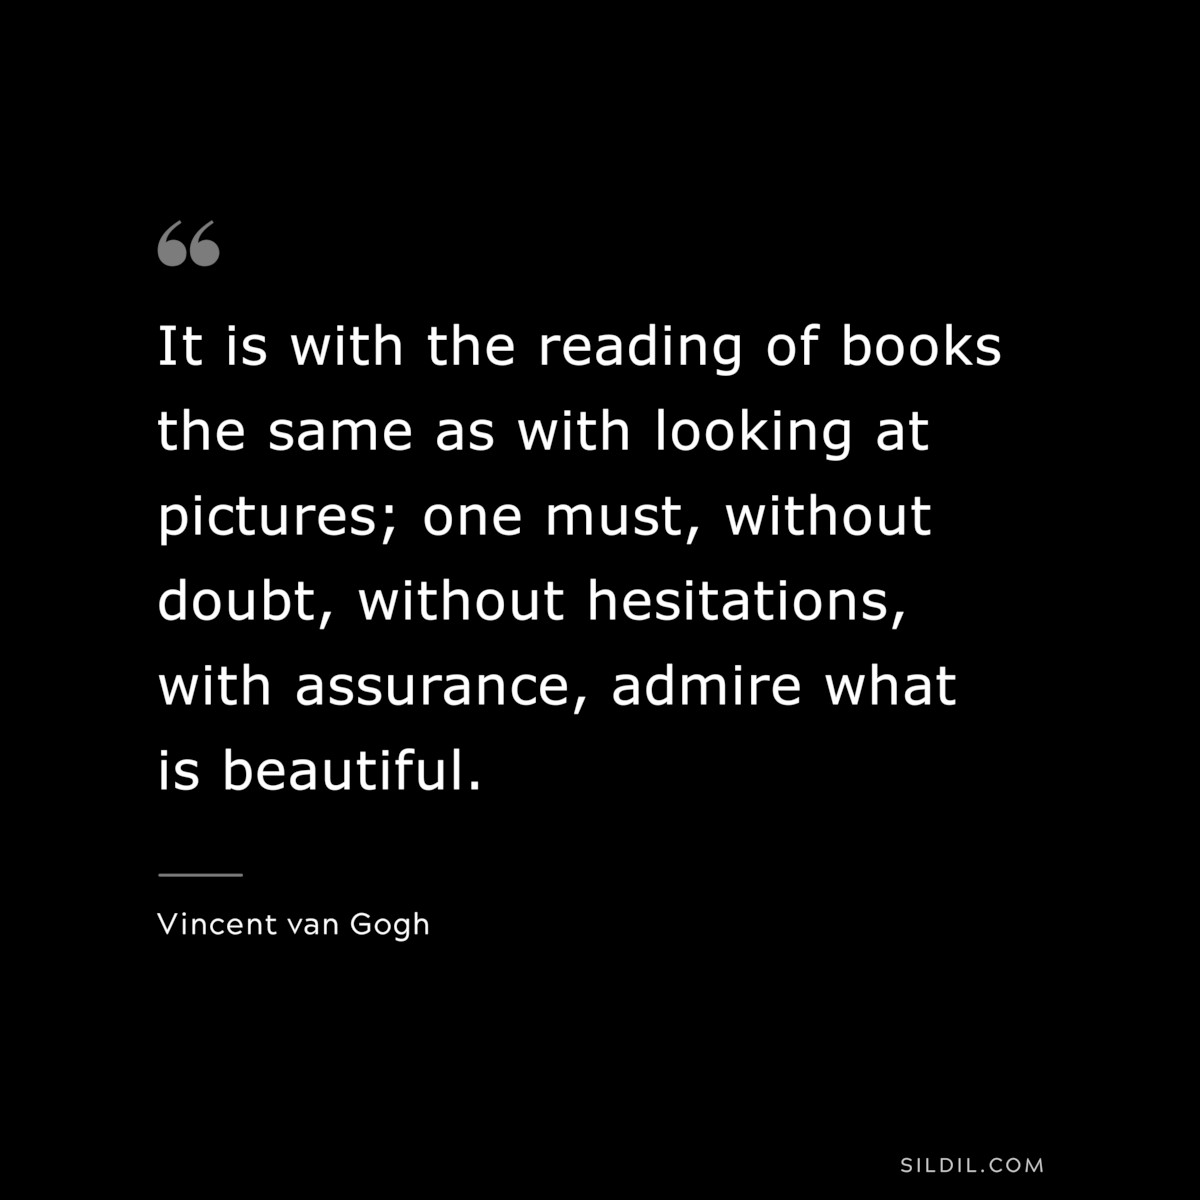 It is with the reading of books the same as with looking at pictures; one must, without doubt, without hesitations, with assurance, admire what is beautiful. ― Vincent van Gogh